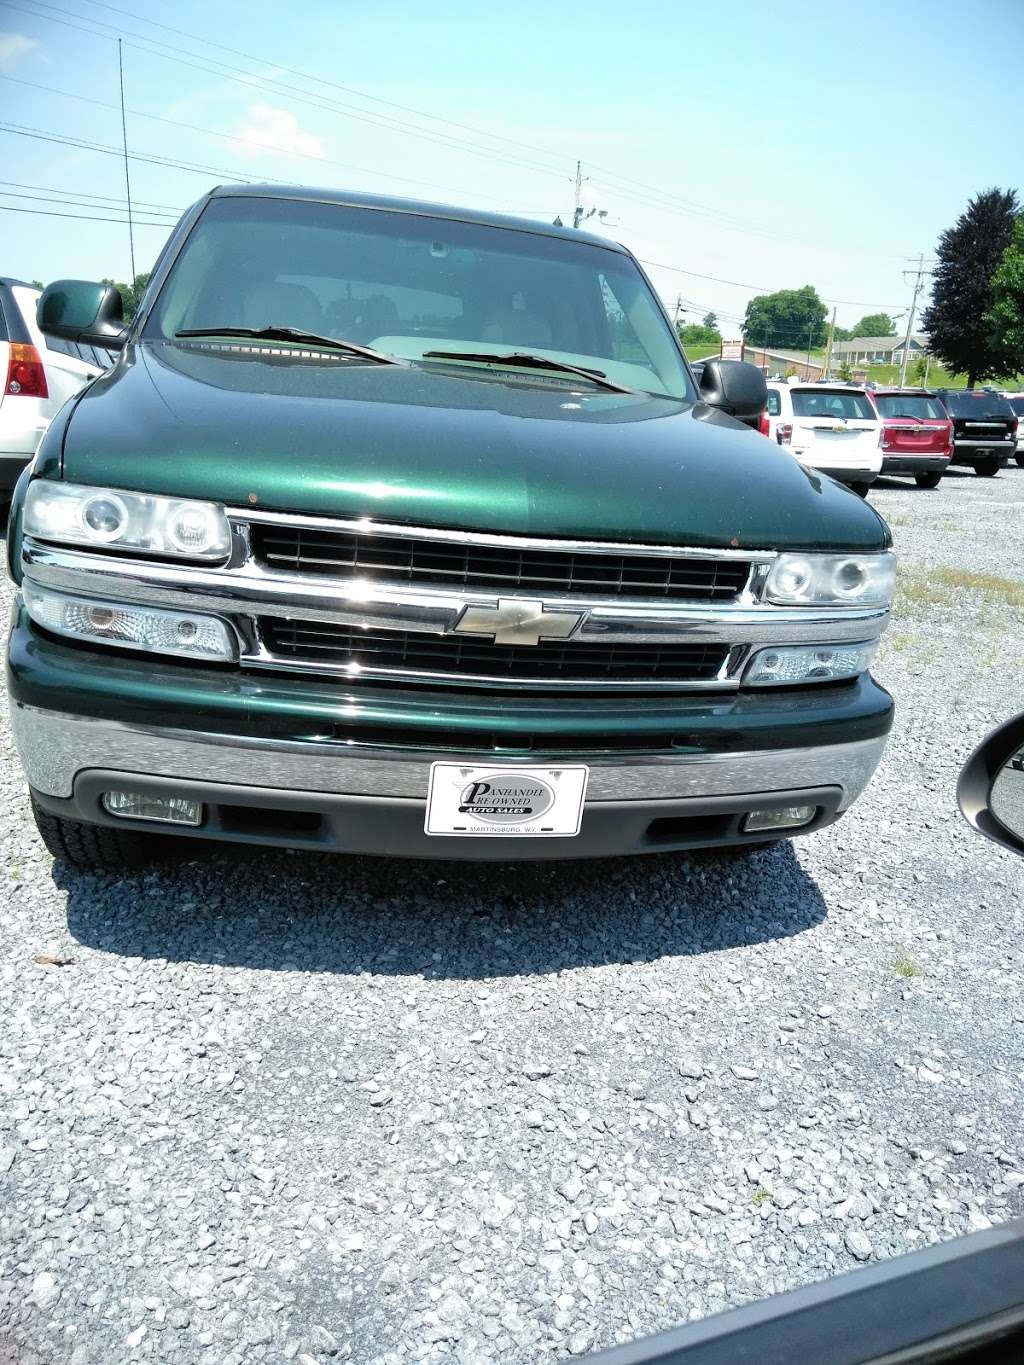 Panhandle Pre-Owned Autos, Inc. | 2568 Hedgesville Rd, Martinsburg, WV 25403 | Phone: (304) 754-5227